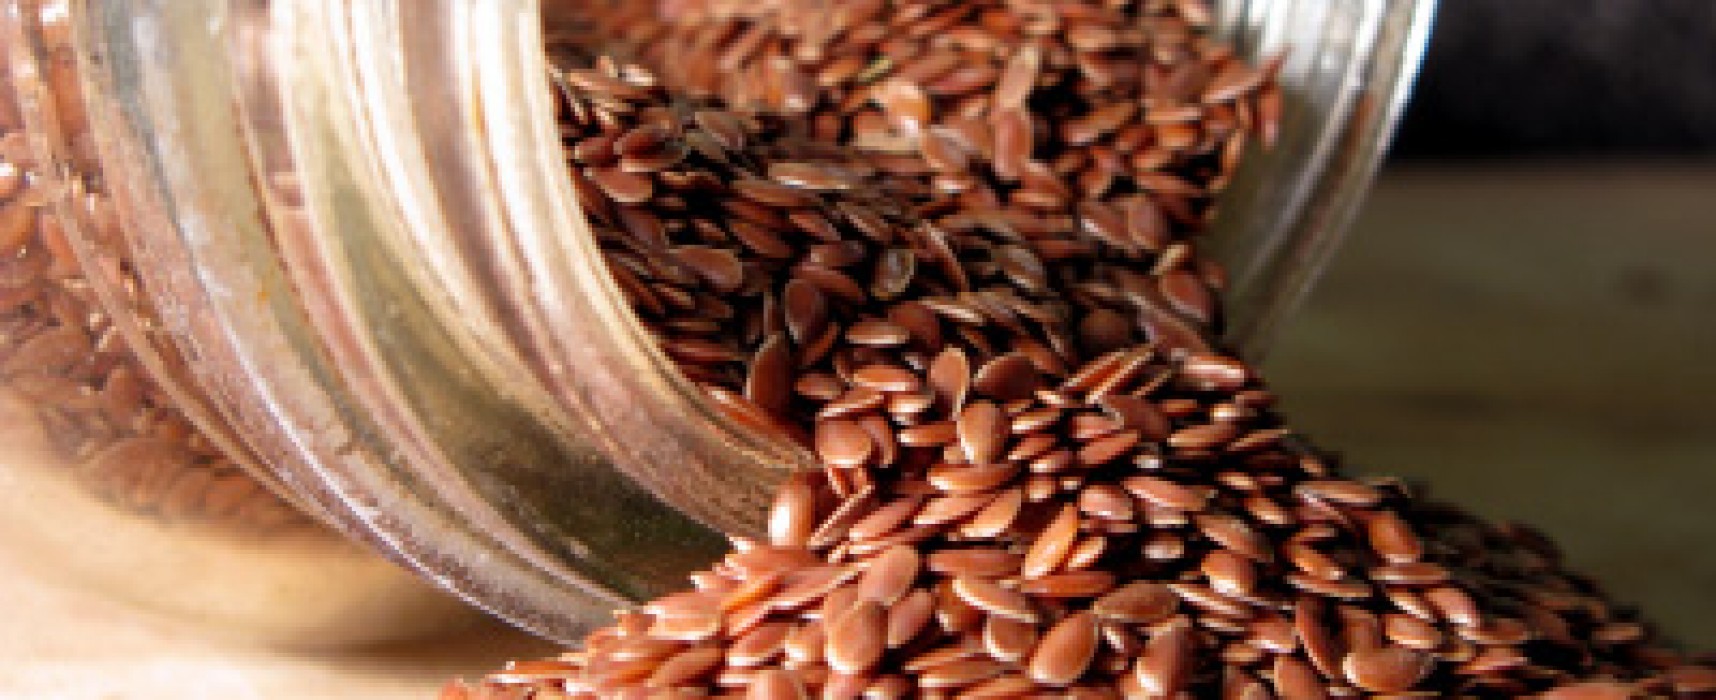 Flax seeds are Nutrition Superstar!